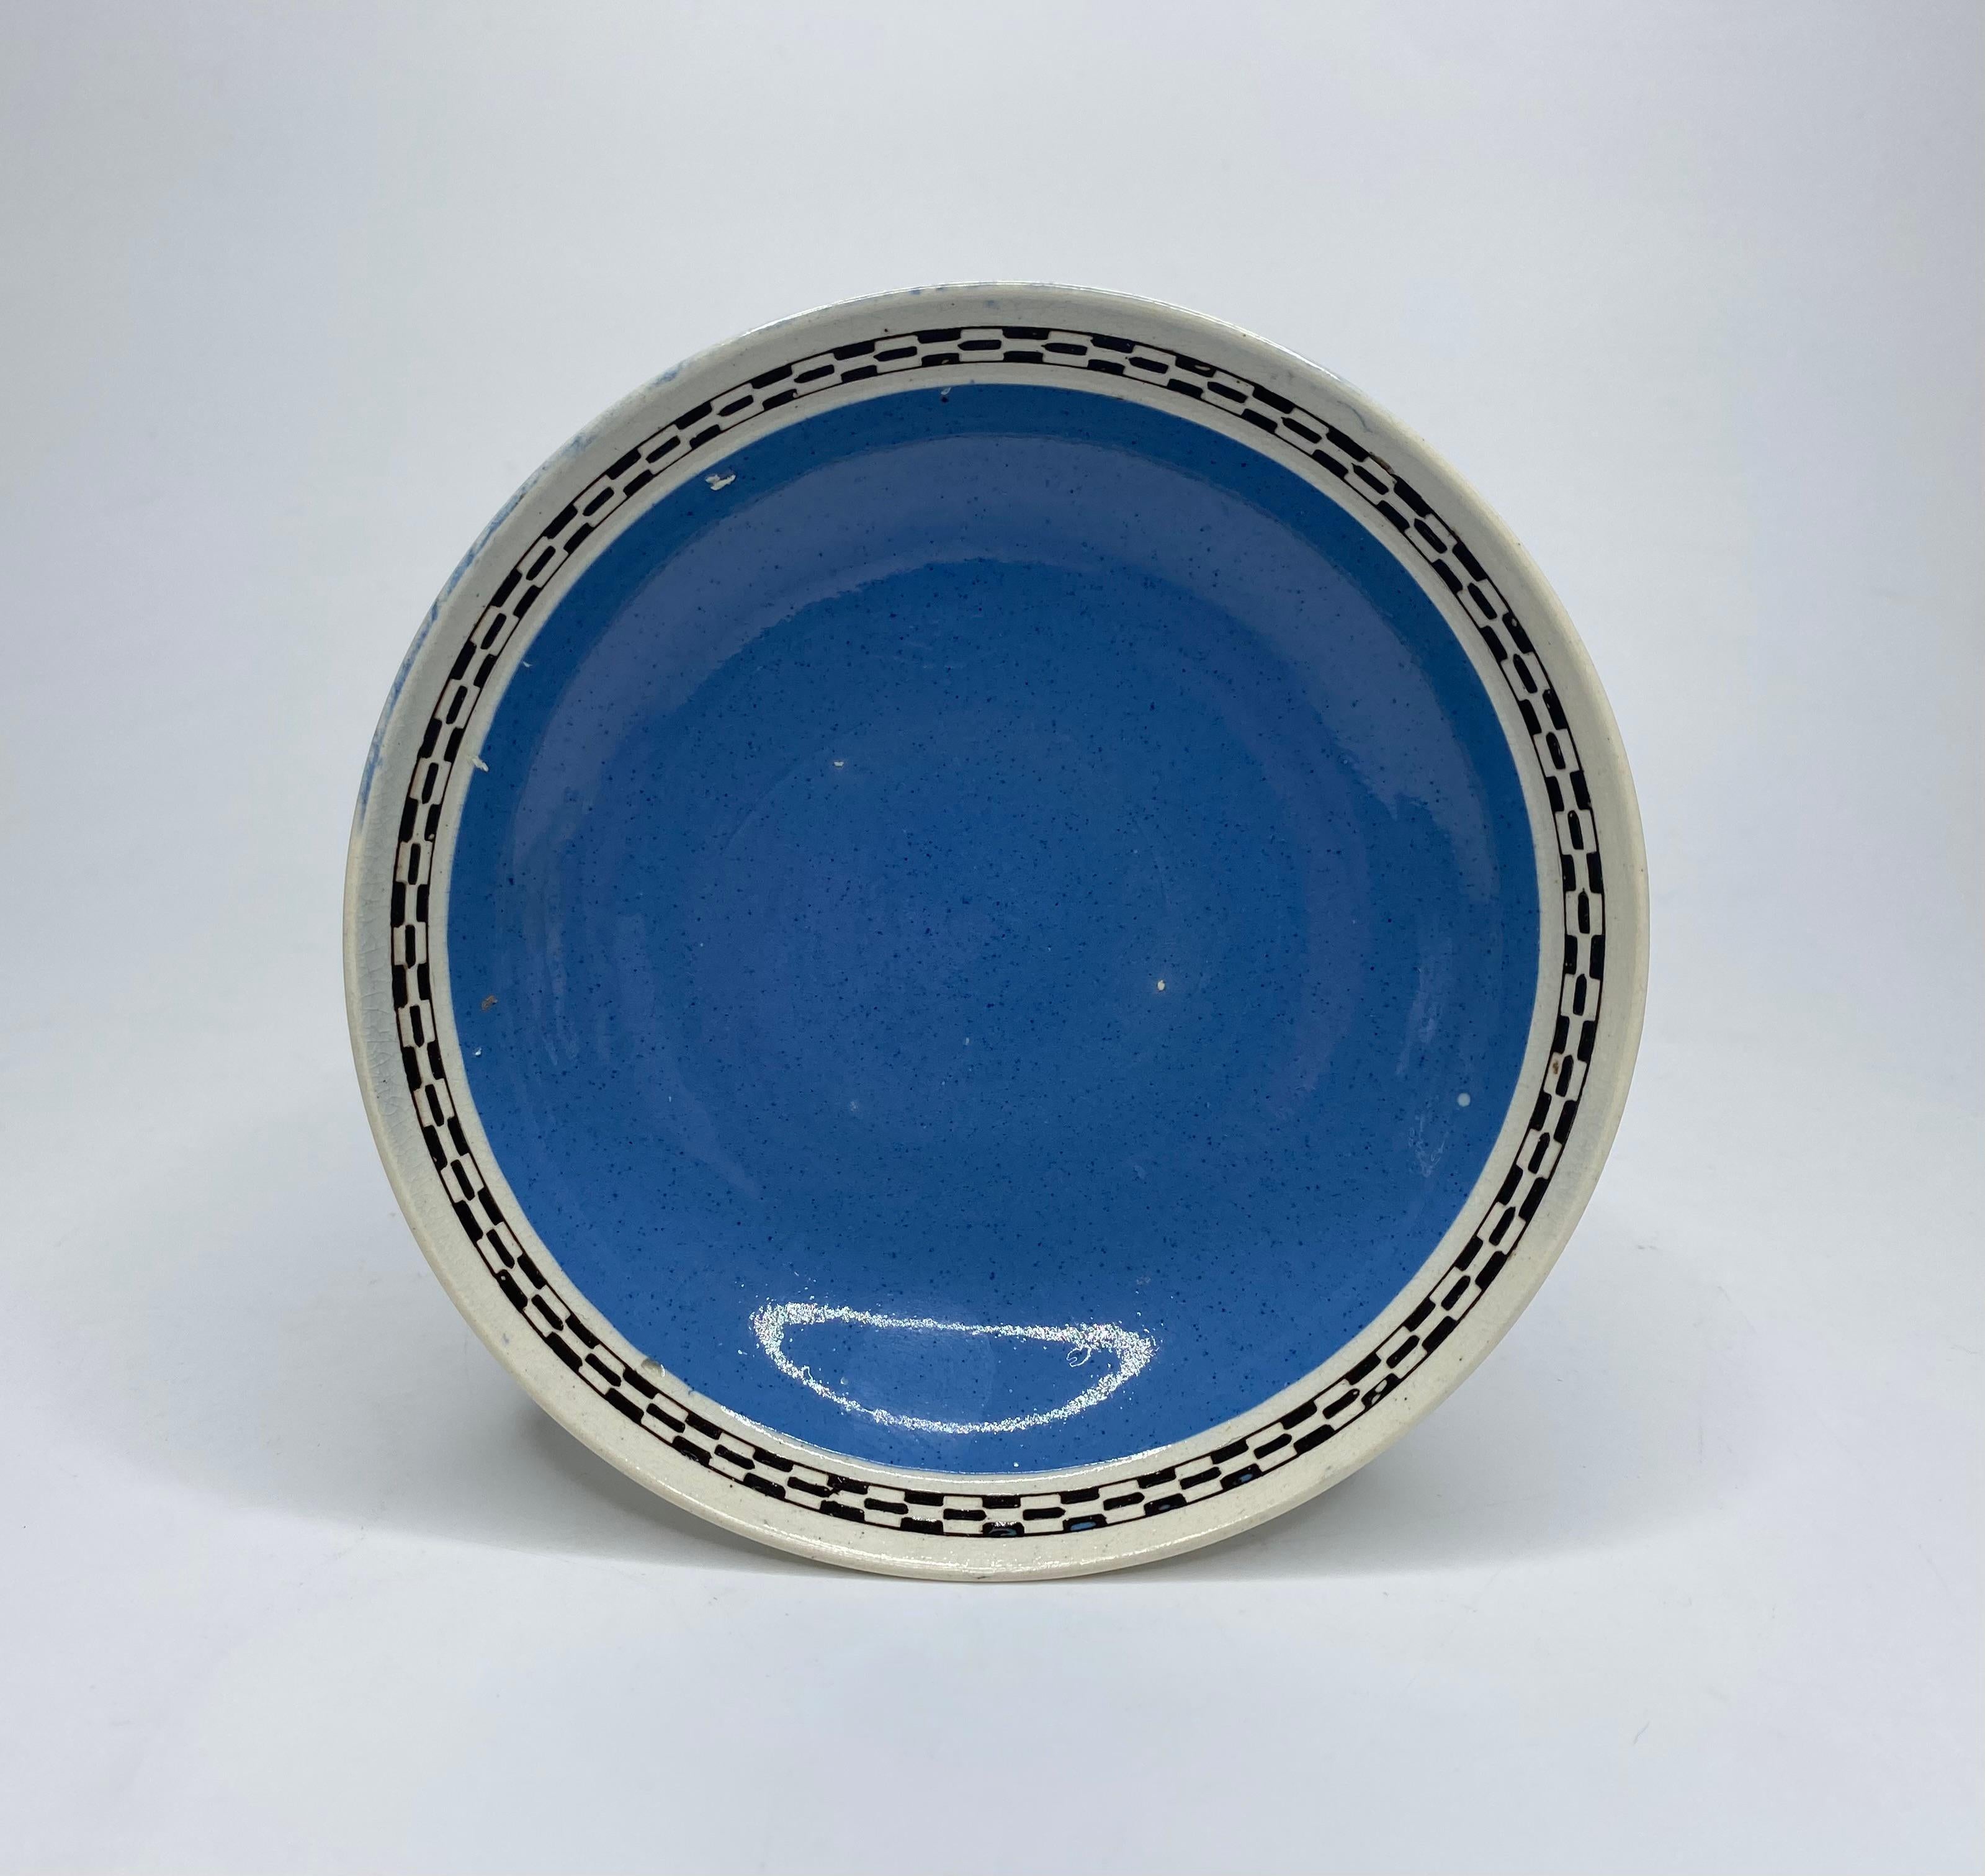 Leeds Pottery cup and saucer, c. 1790. Both pieces decorated with a broad band of powder blue slip, within a brown and white chequer board rim. All beneath a pearlware glaze.
The cup, having a fluted double strap handle, and flowerhead terminals,